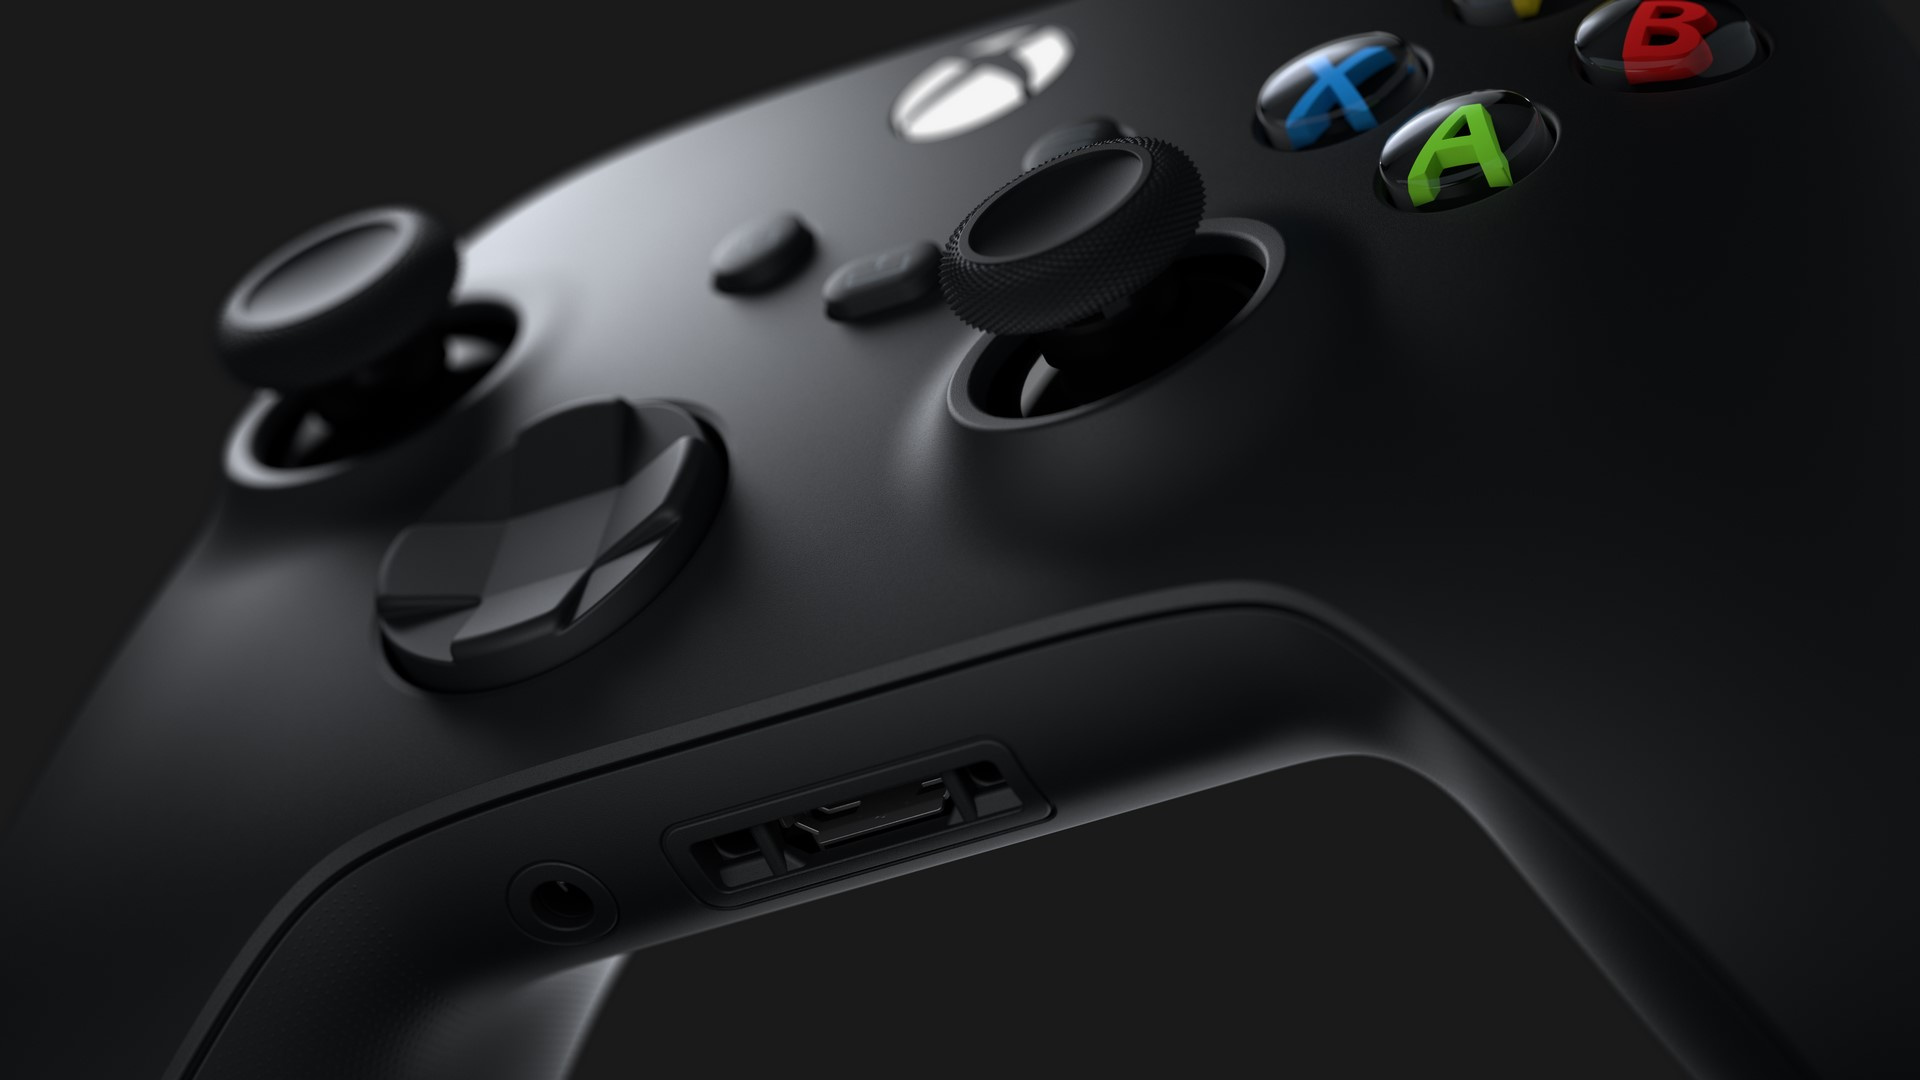 Gallery: Check Out The New Xbox Series X Controller - Xbox News